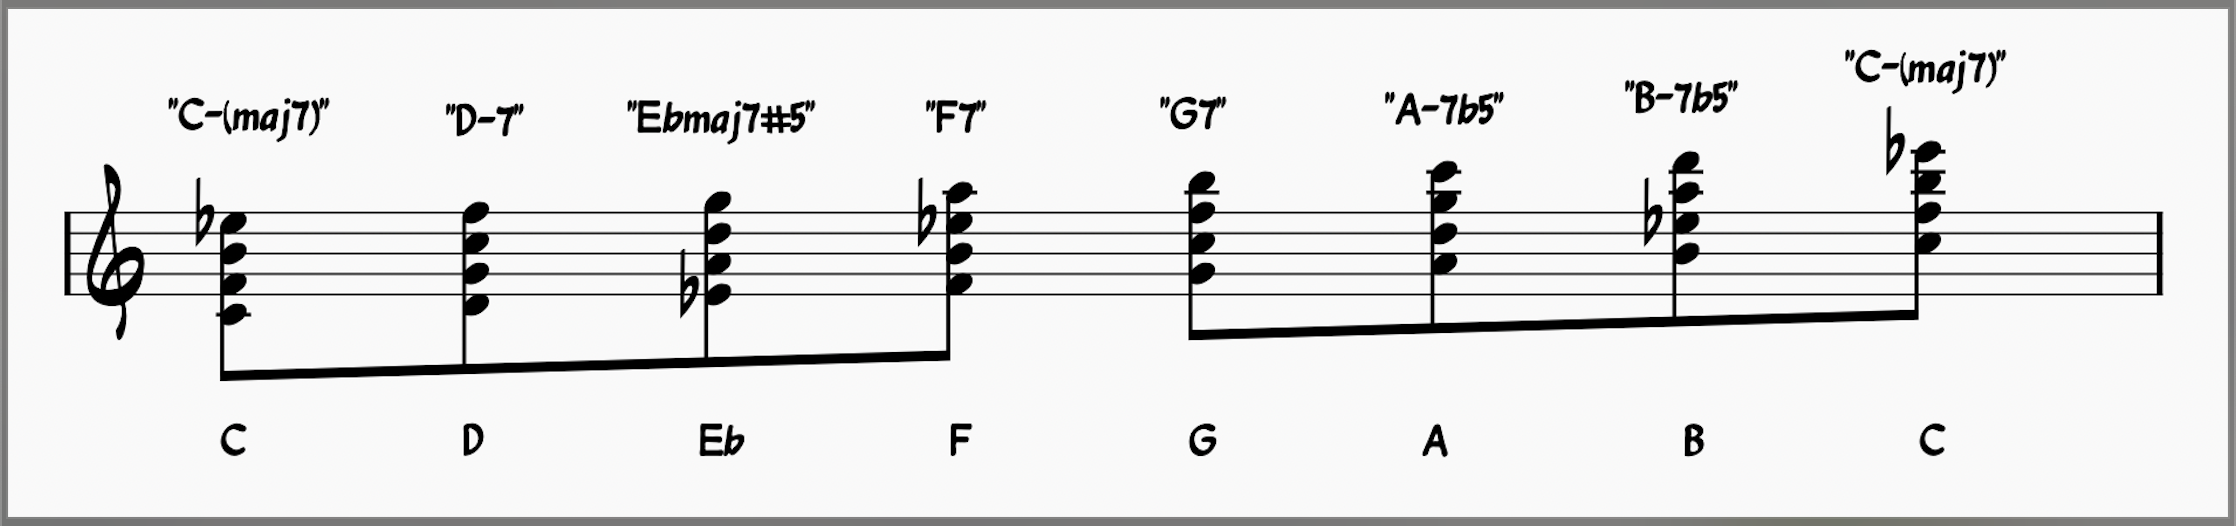 C melodic minor scale harmonized in 4ths